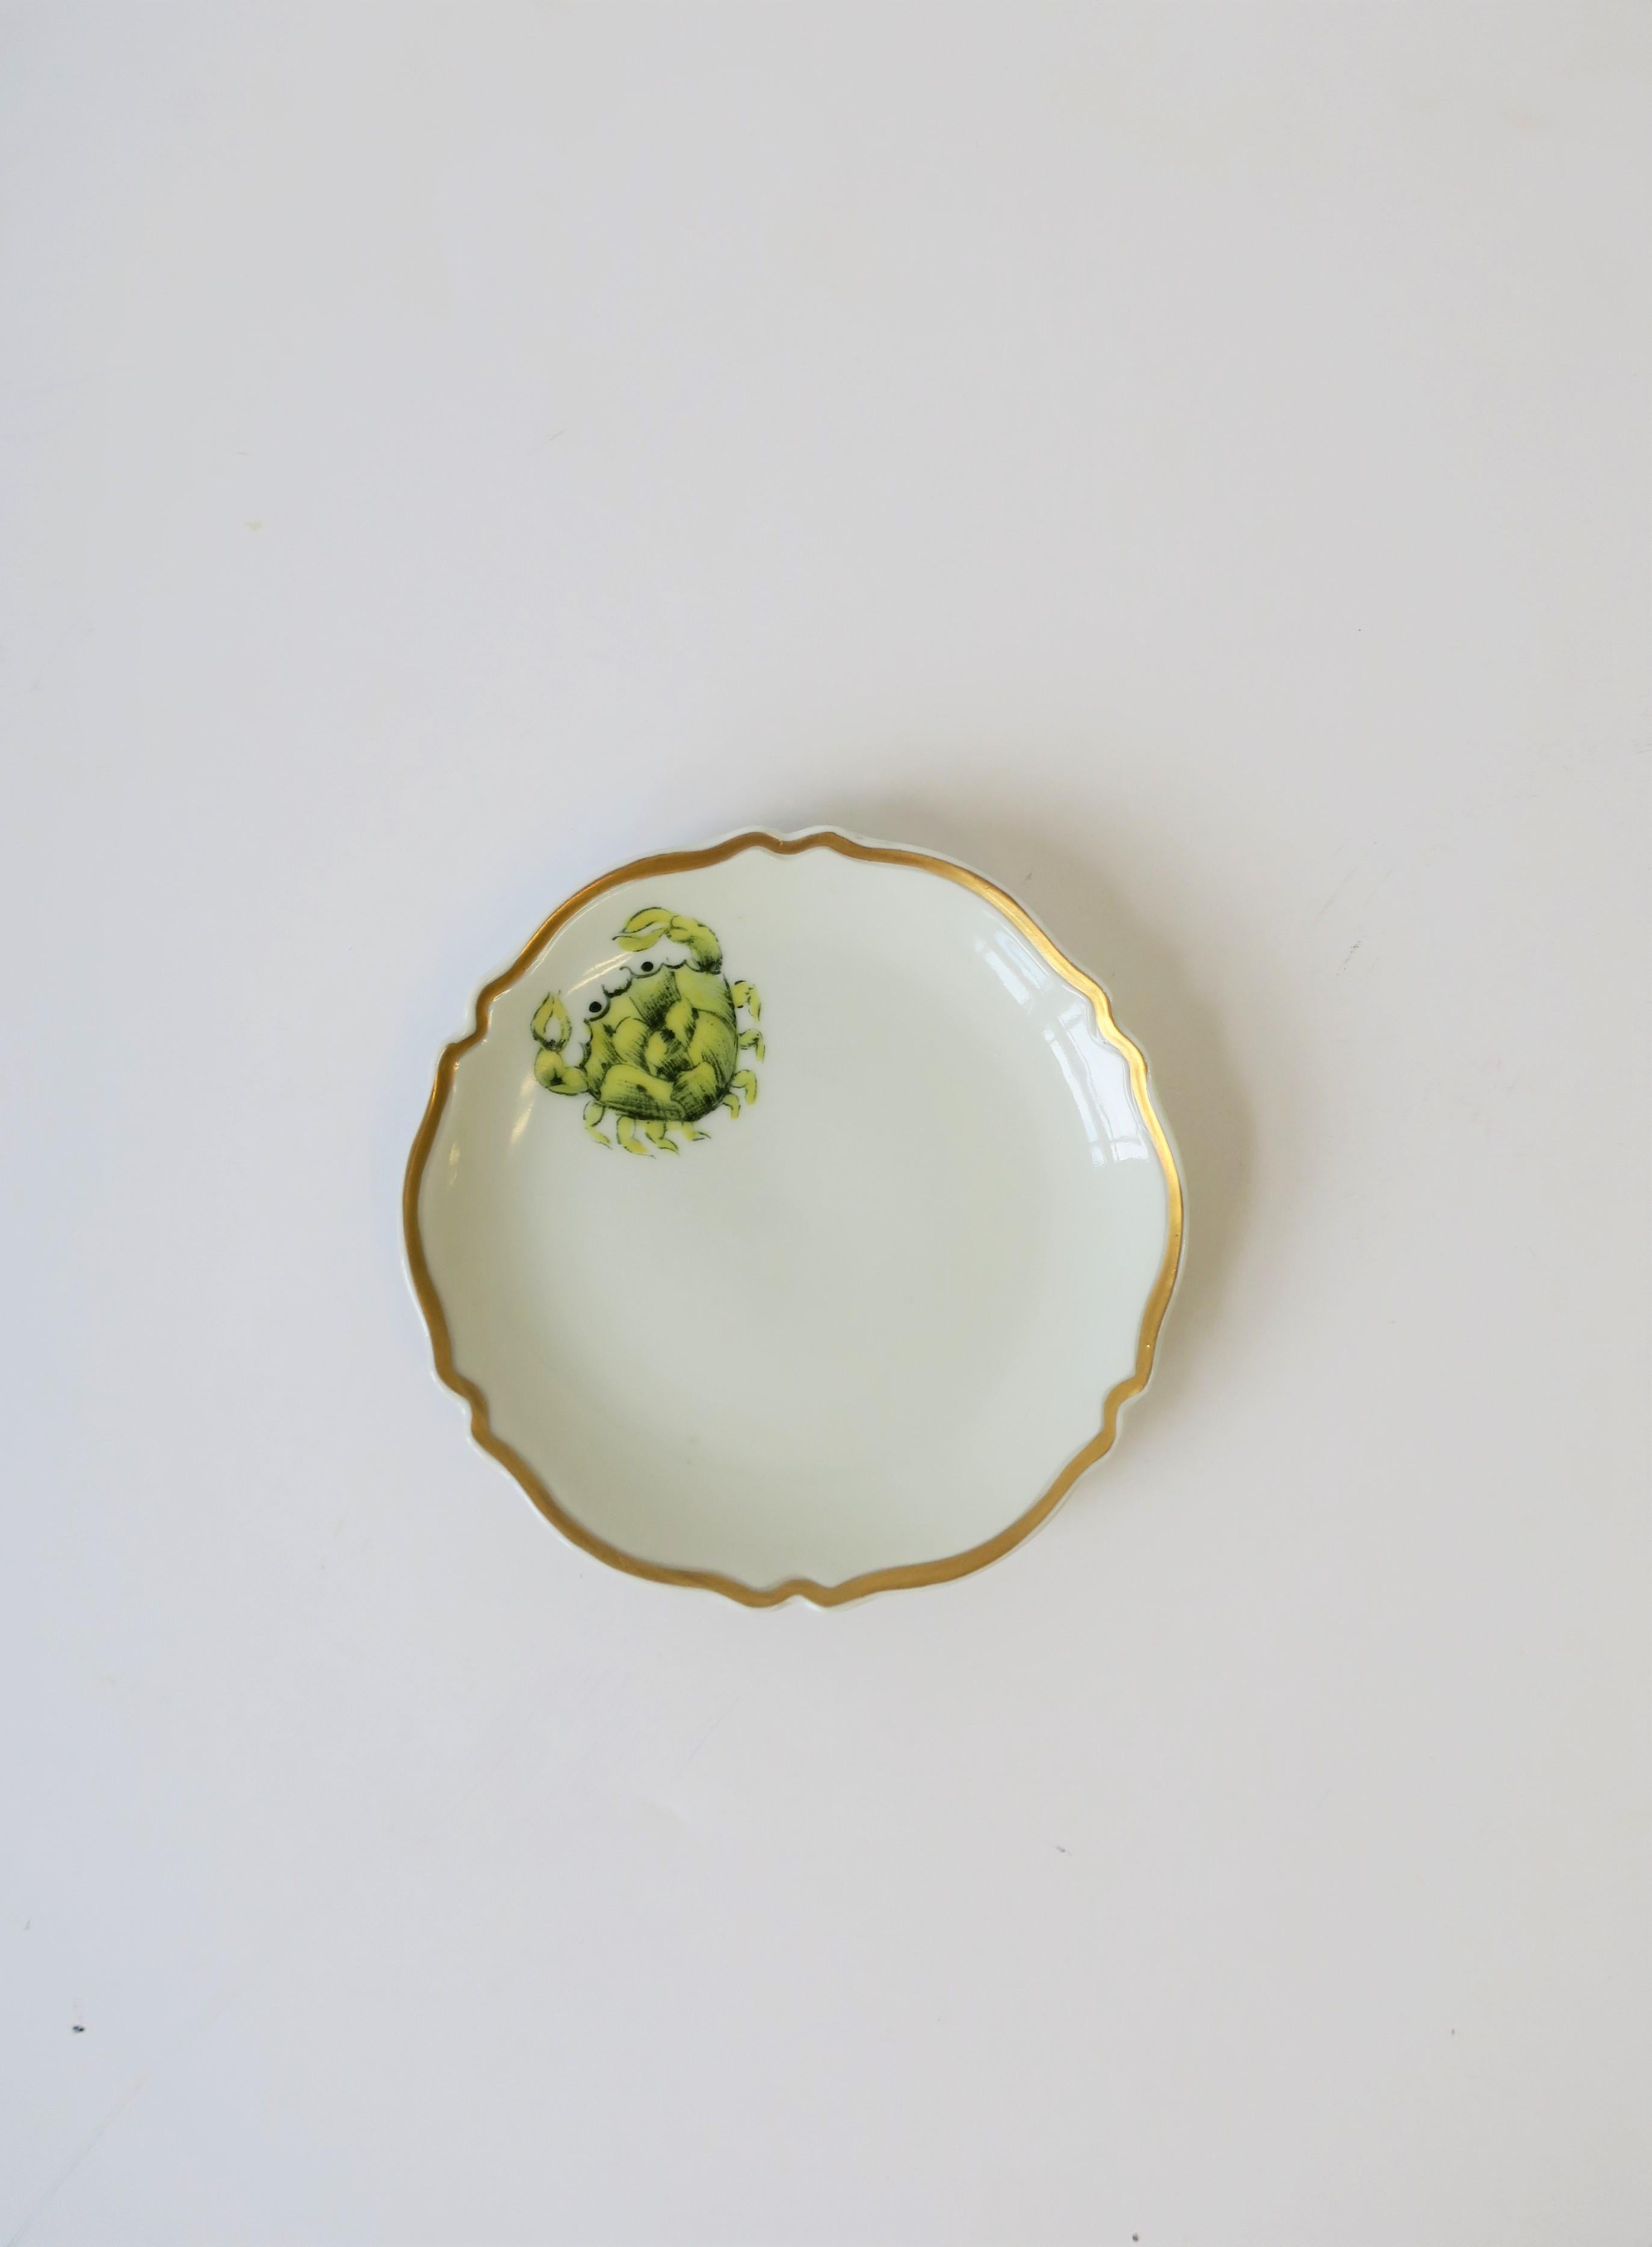 A beautiful midcentury French porcelain white and gold round jewelry dish signed by designer, circa mid-20th century, France. Dish has gold detail around decorative edge, and a decorative 'crab' sea creature or crustacean. All hand-painted. This